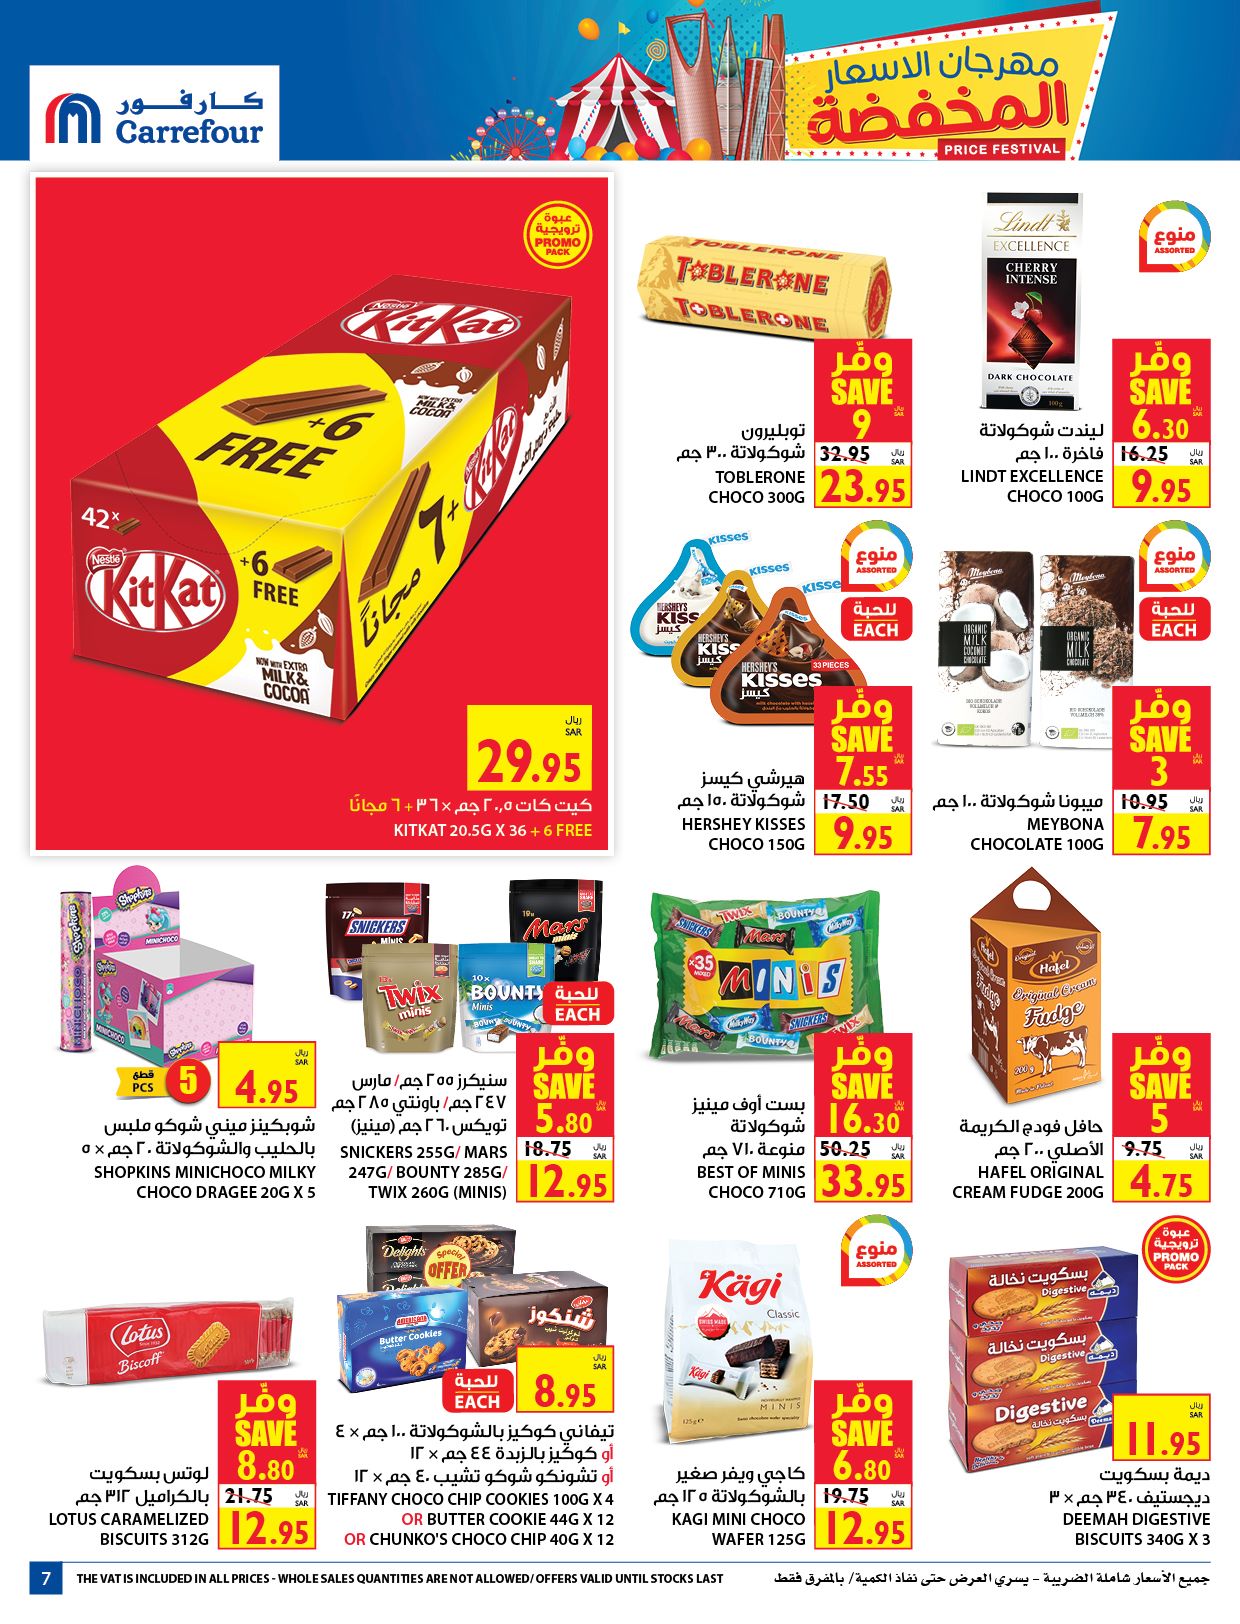 Carrefour Festival Offers from 12/8 till 25/8 | Carrefour KSA 8